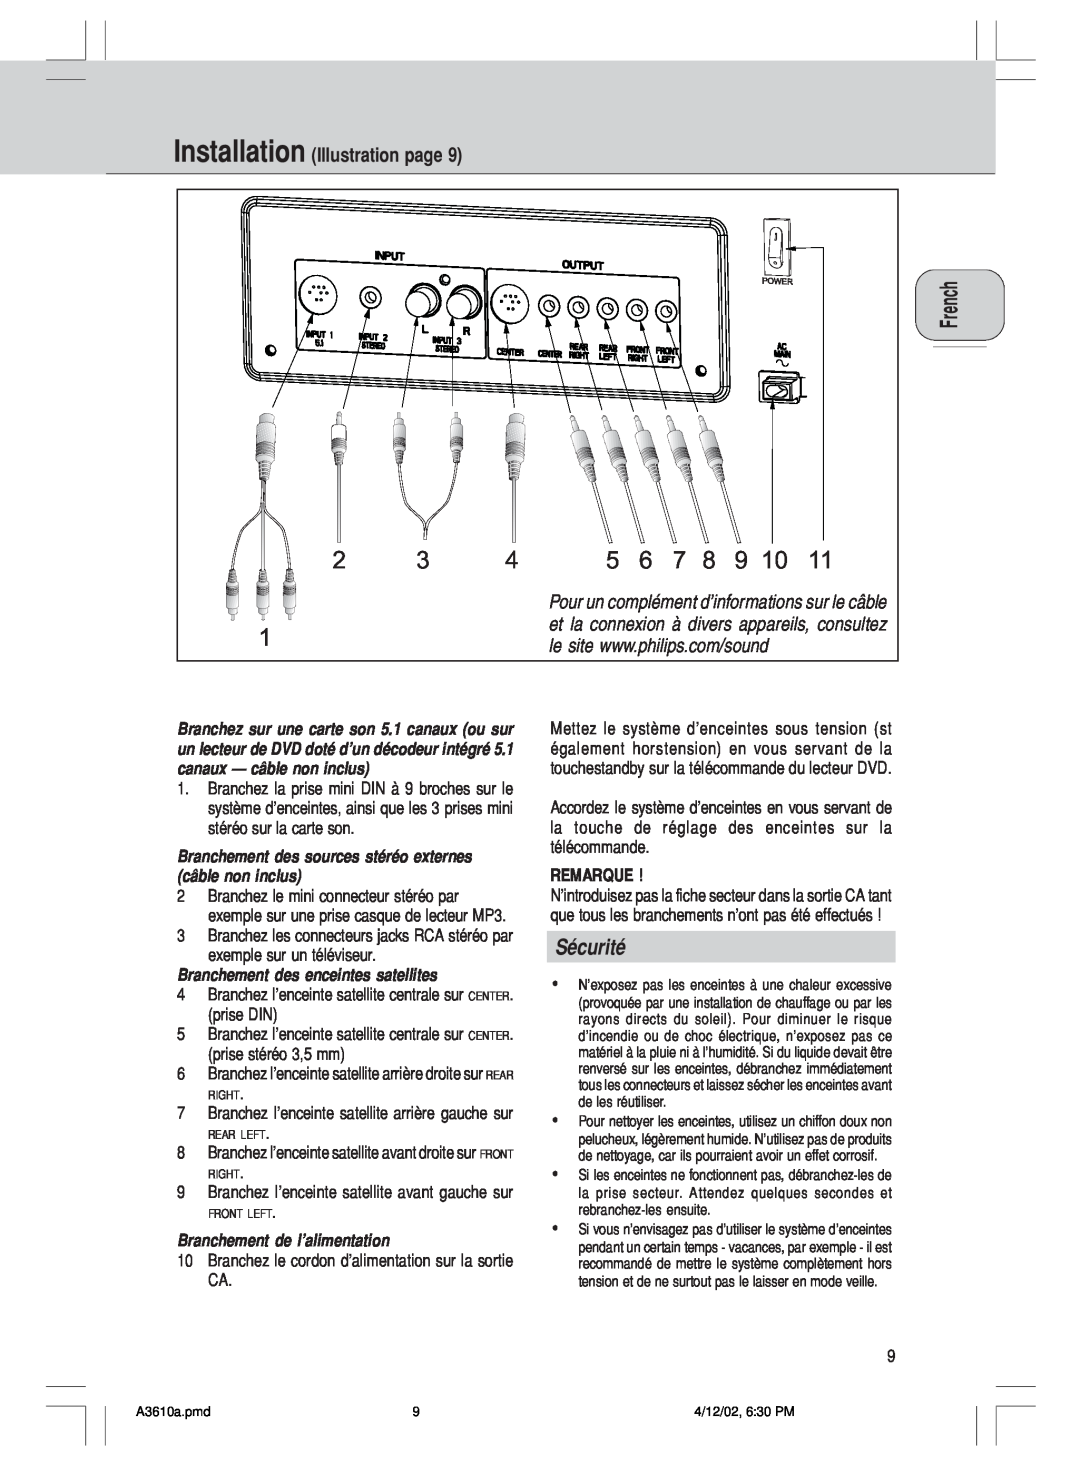 Philips MMS316, A3.610 manual 2 3, Installation Illustration page 